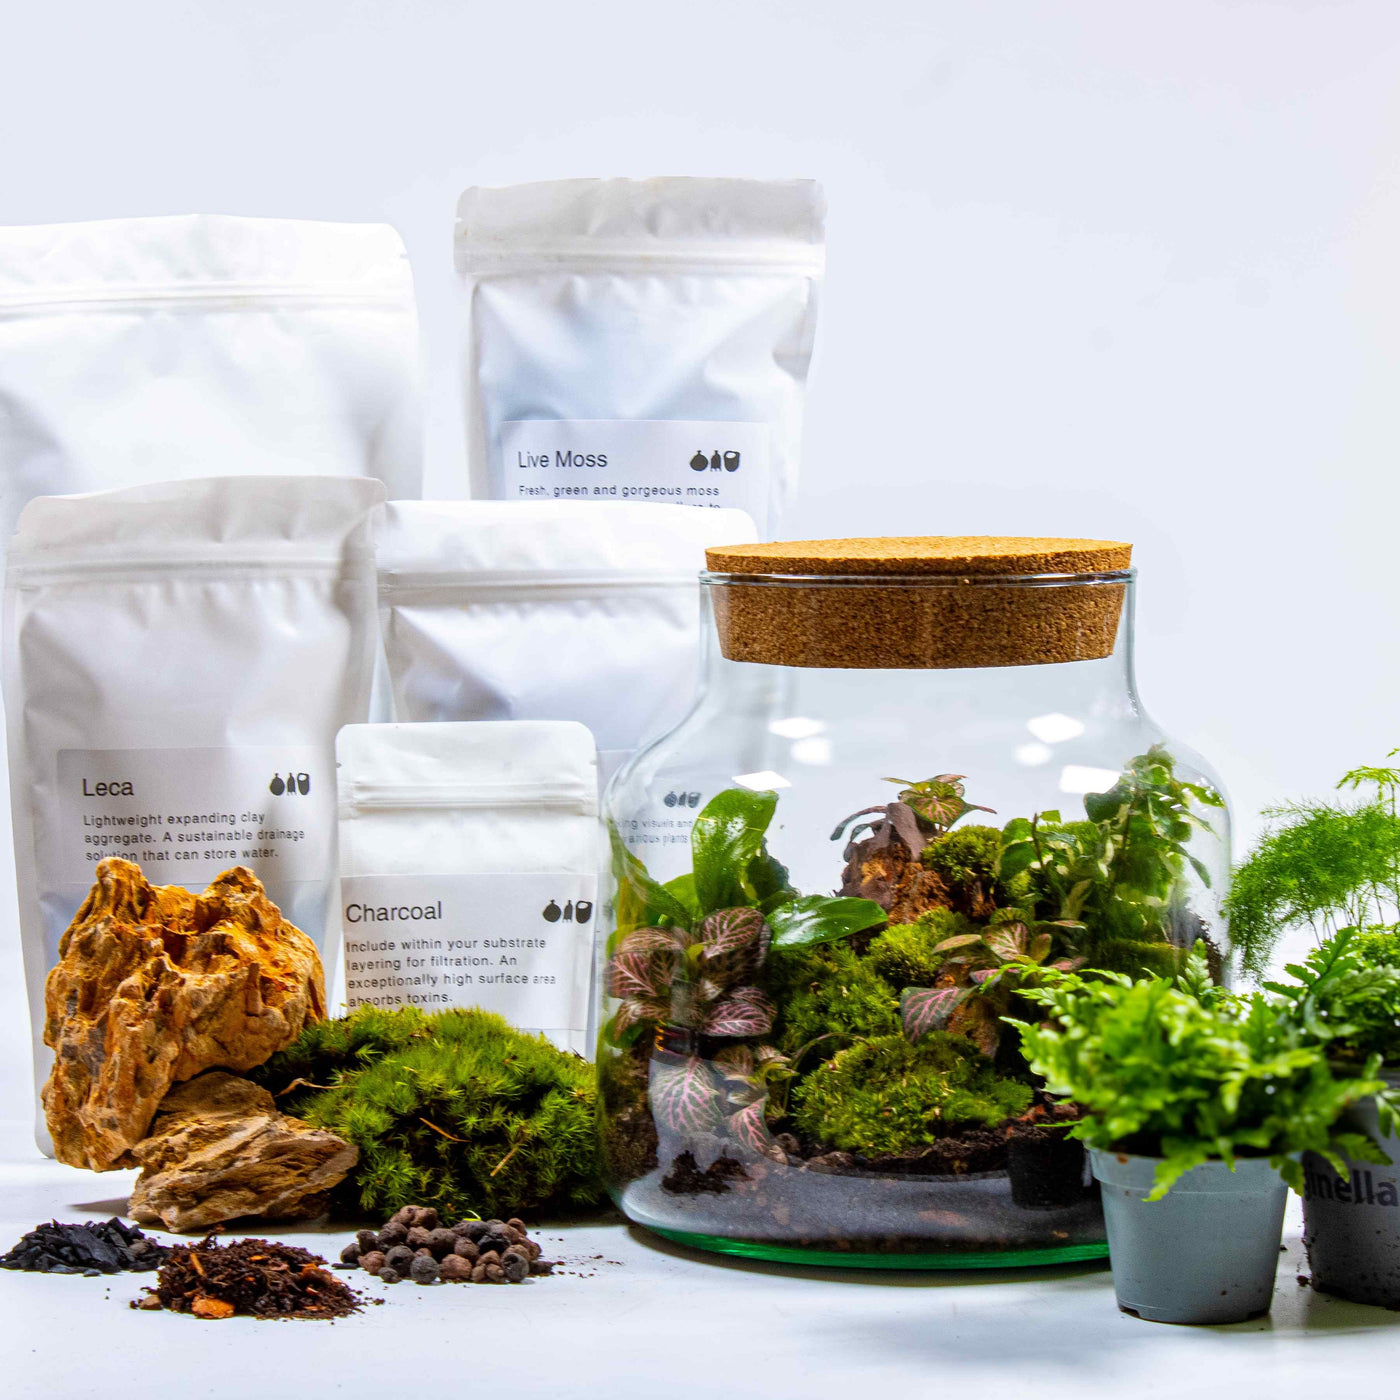 Create your own botanical haven with our classic terrarium kit.